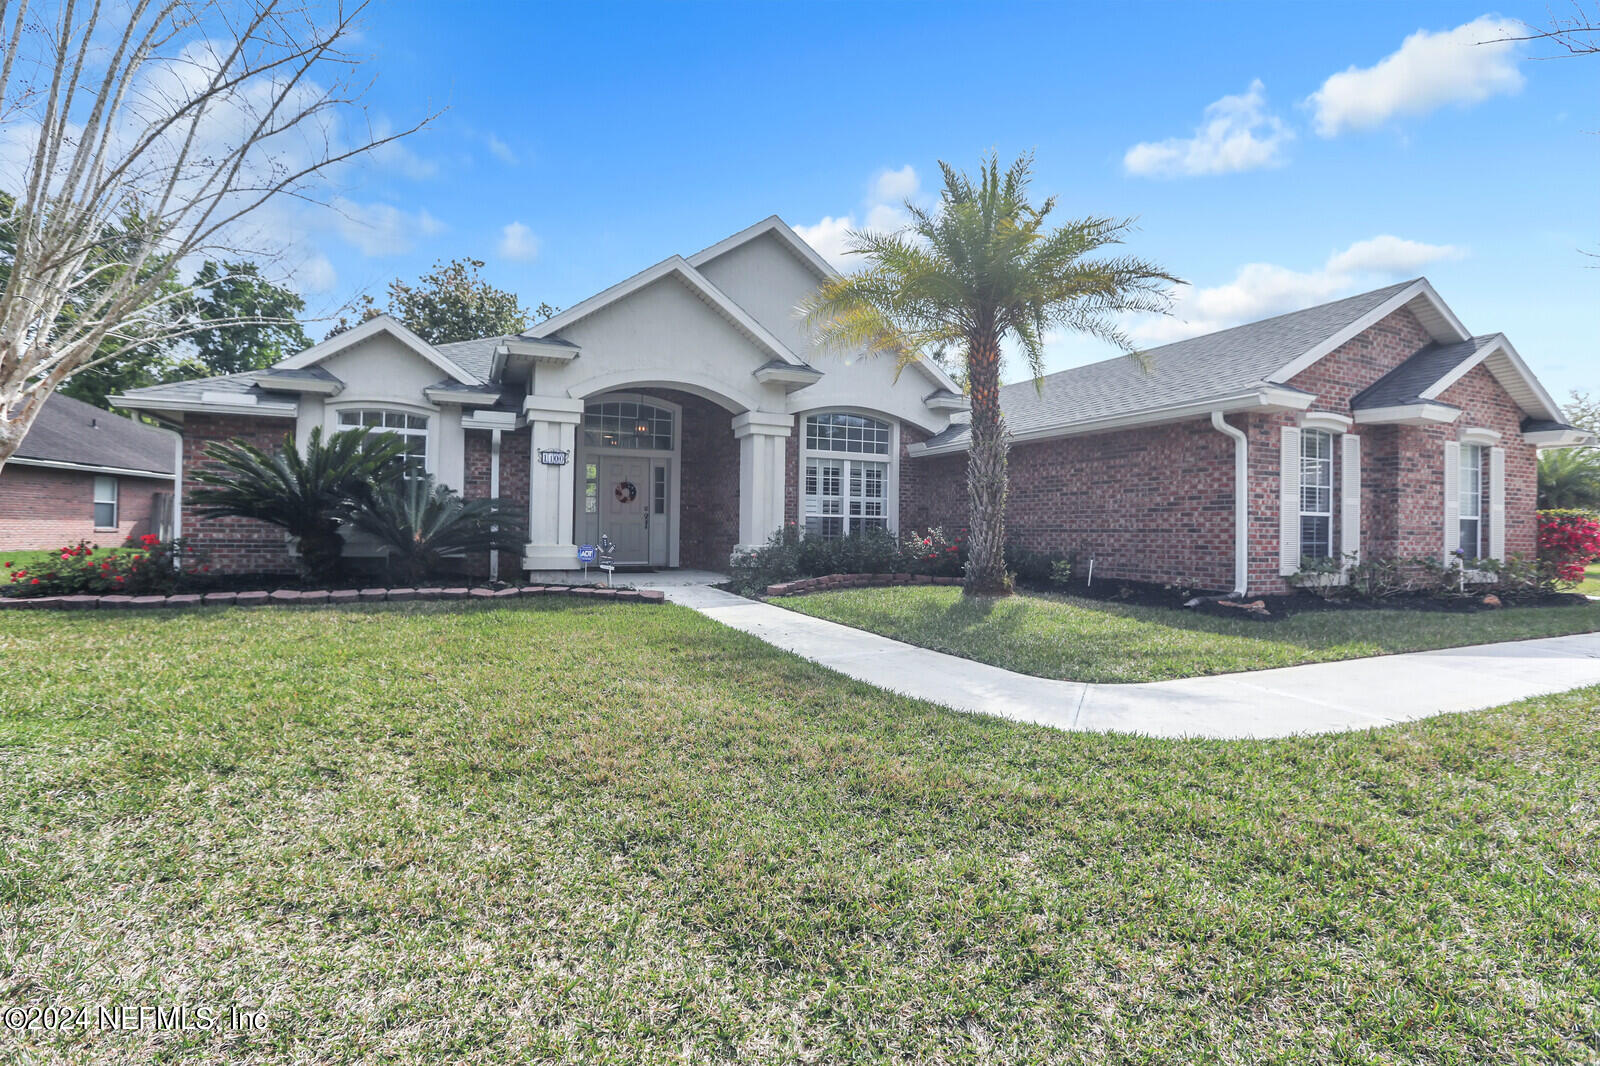 St Johns, FL home for sale located at 1400 WINDFLOWER Circle, St Johns, FL 32259